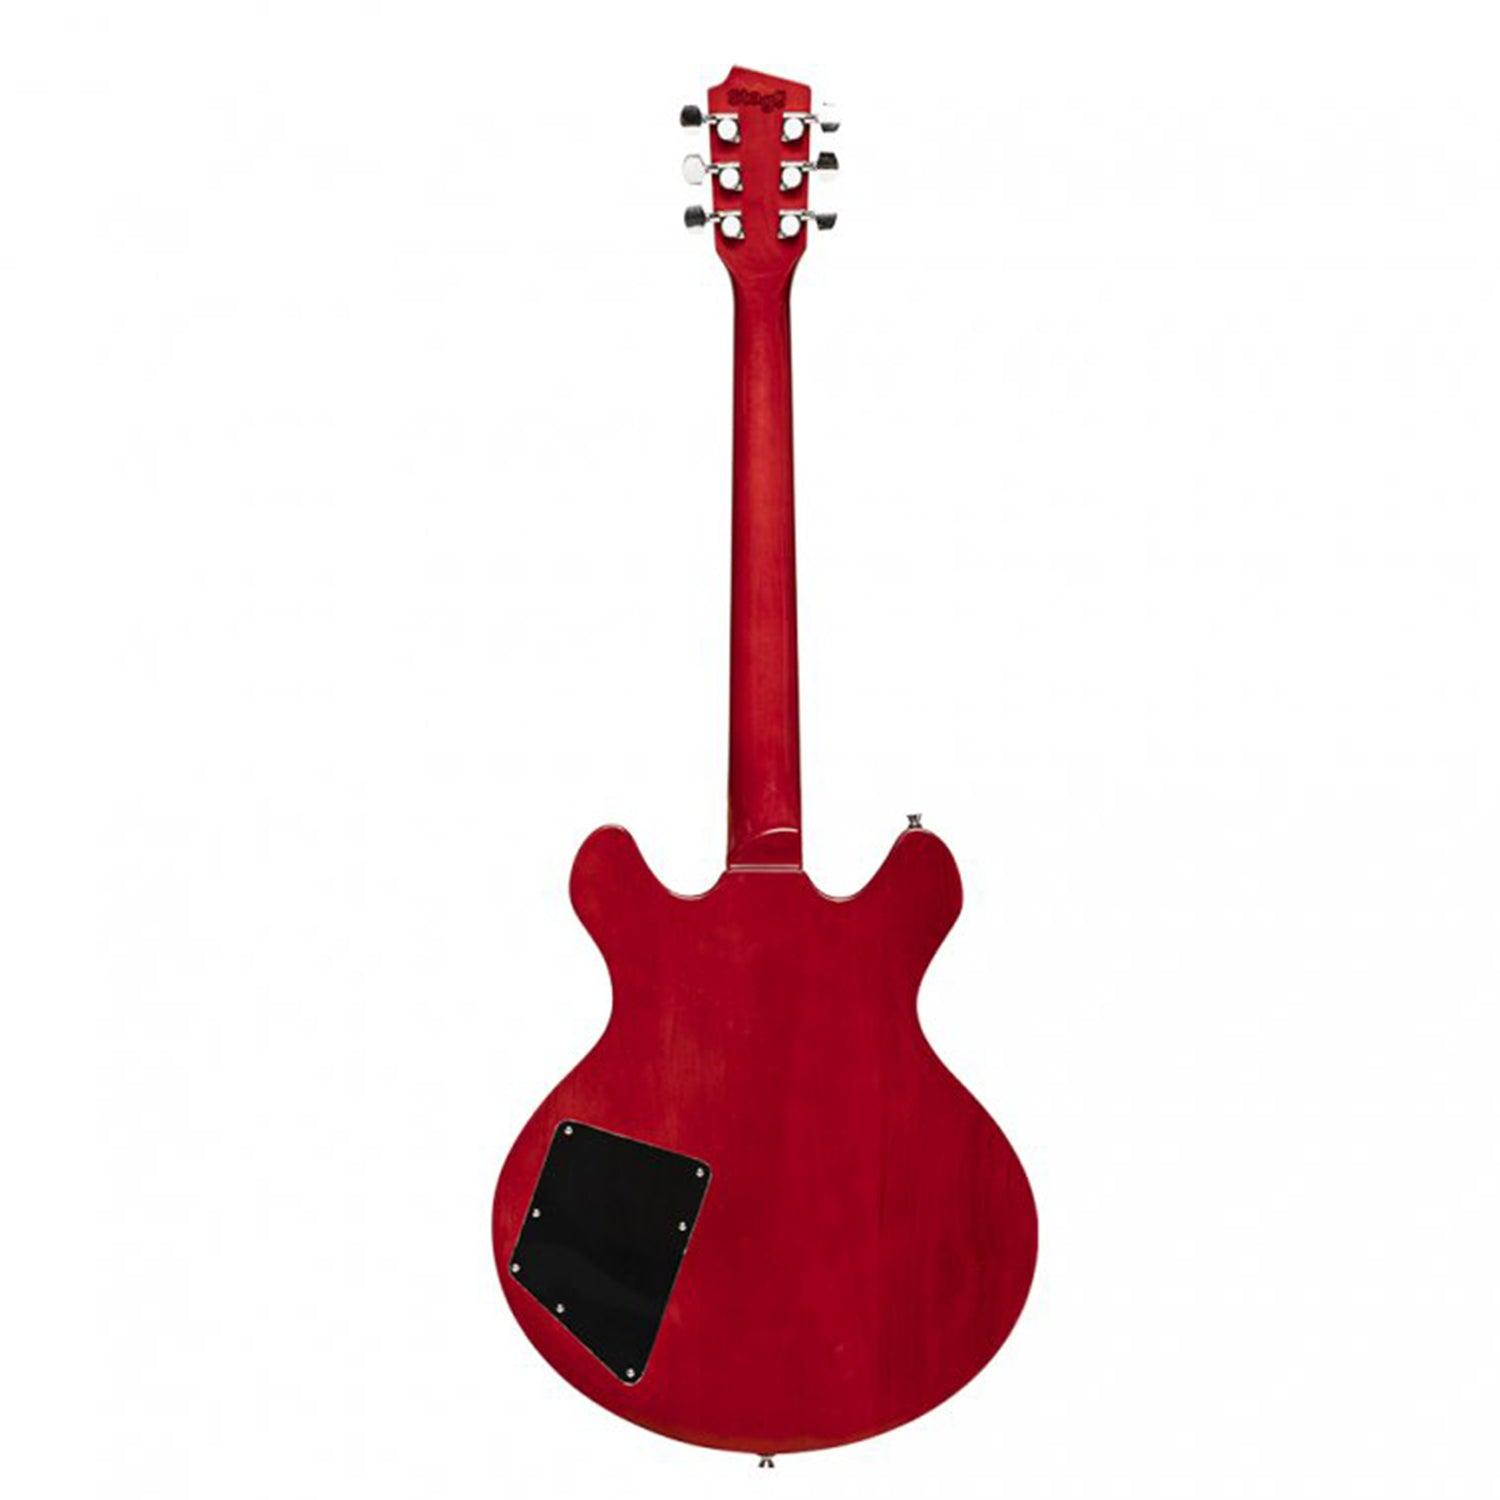 Stagg SVY 533 TCH Silveray series 533 model Electric Guitar with chambered maple body - DY Pro Audio